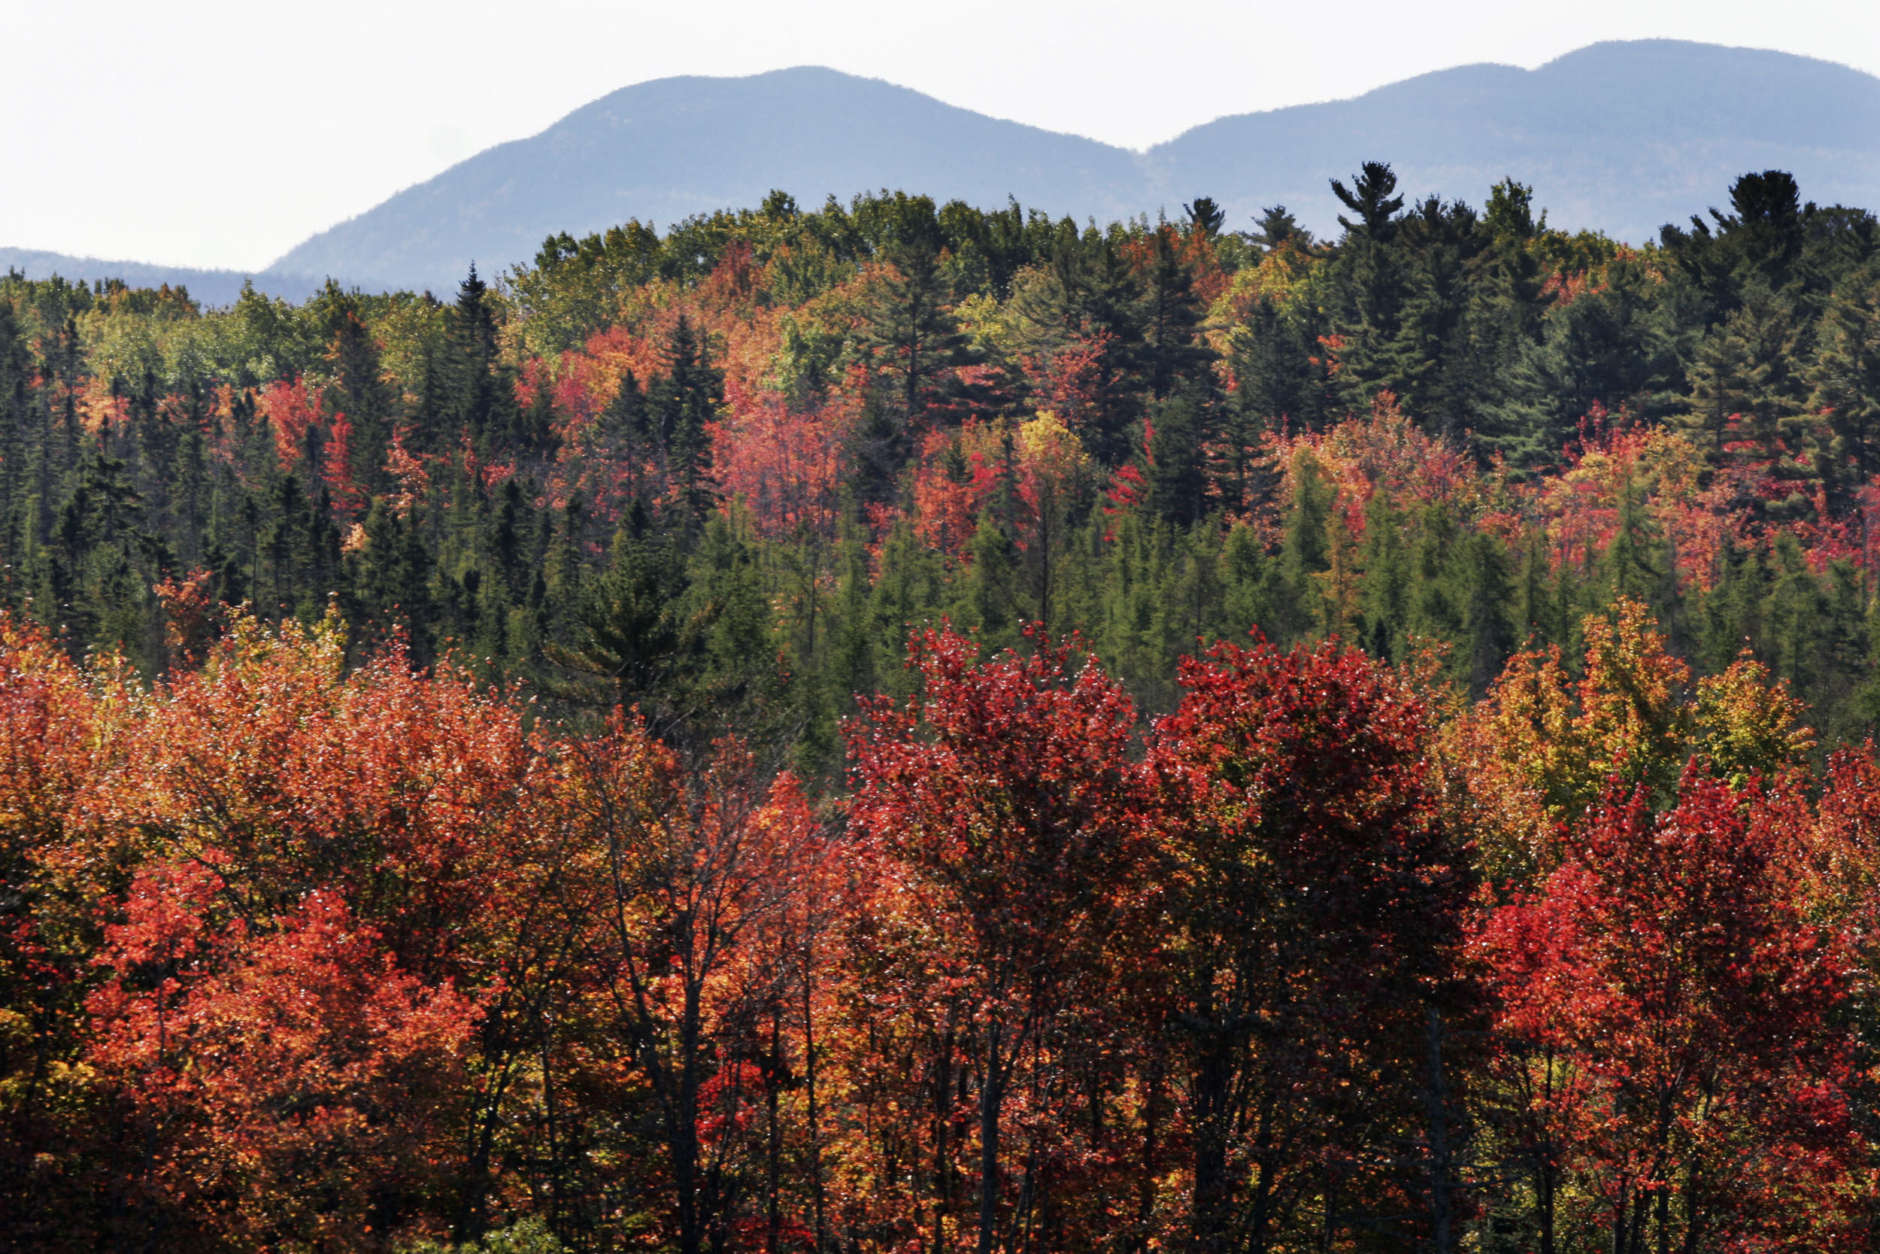 Fall foliage colors appear to be near their peak in Hancock, Maine, as the mountain tops of Acadia National Park are seen in the background on Tuesday, Oct. 9, 2007.  (AP Photo/Pat Wellenbach)